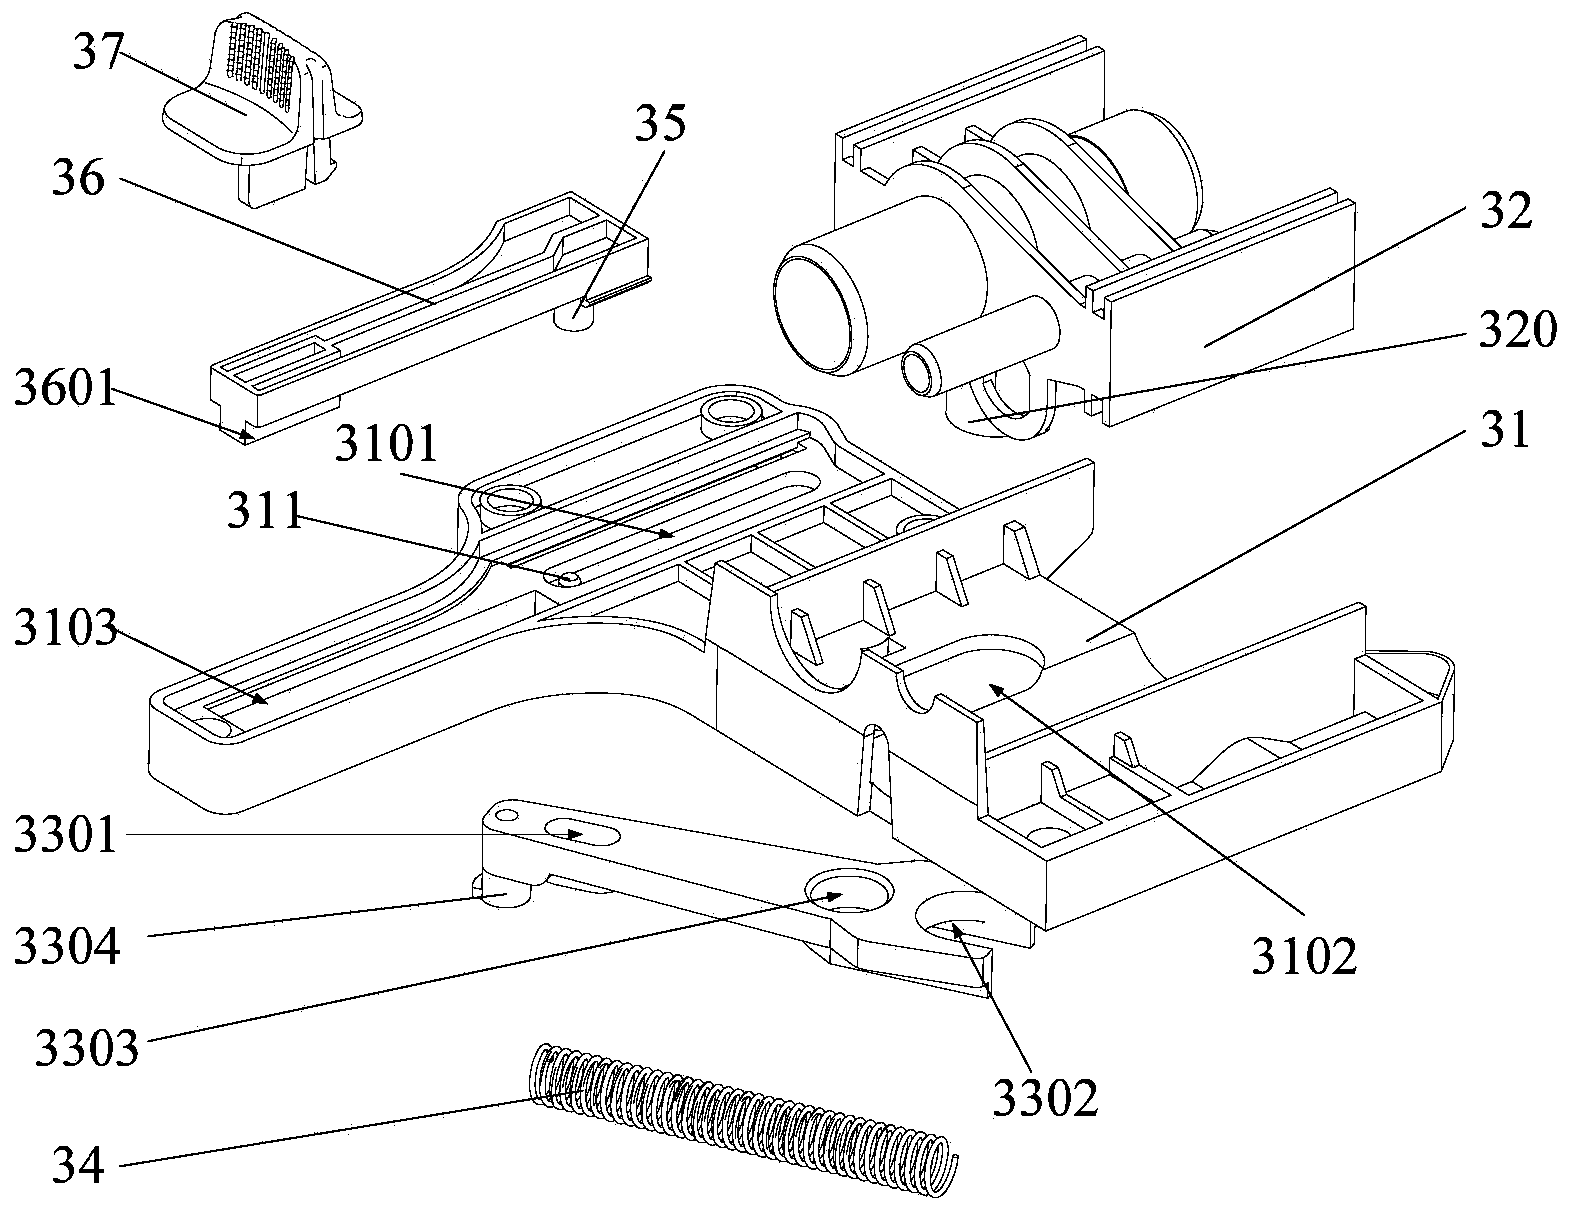 Automatic urinary and fecal nursing device